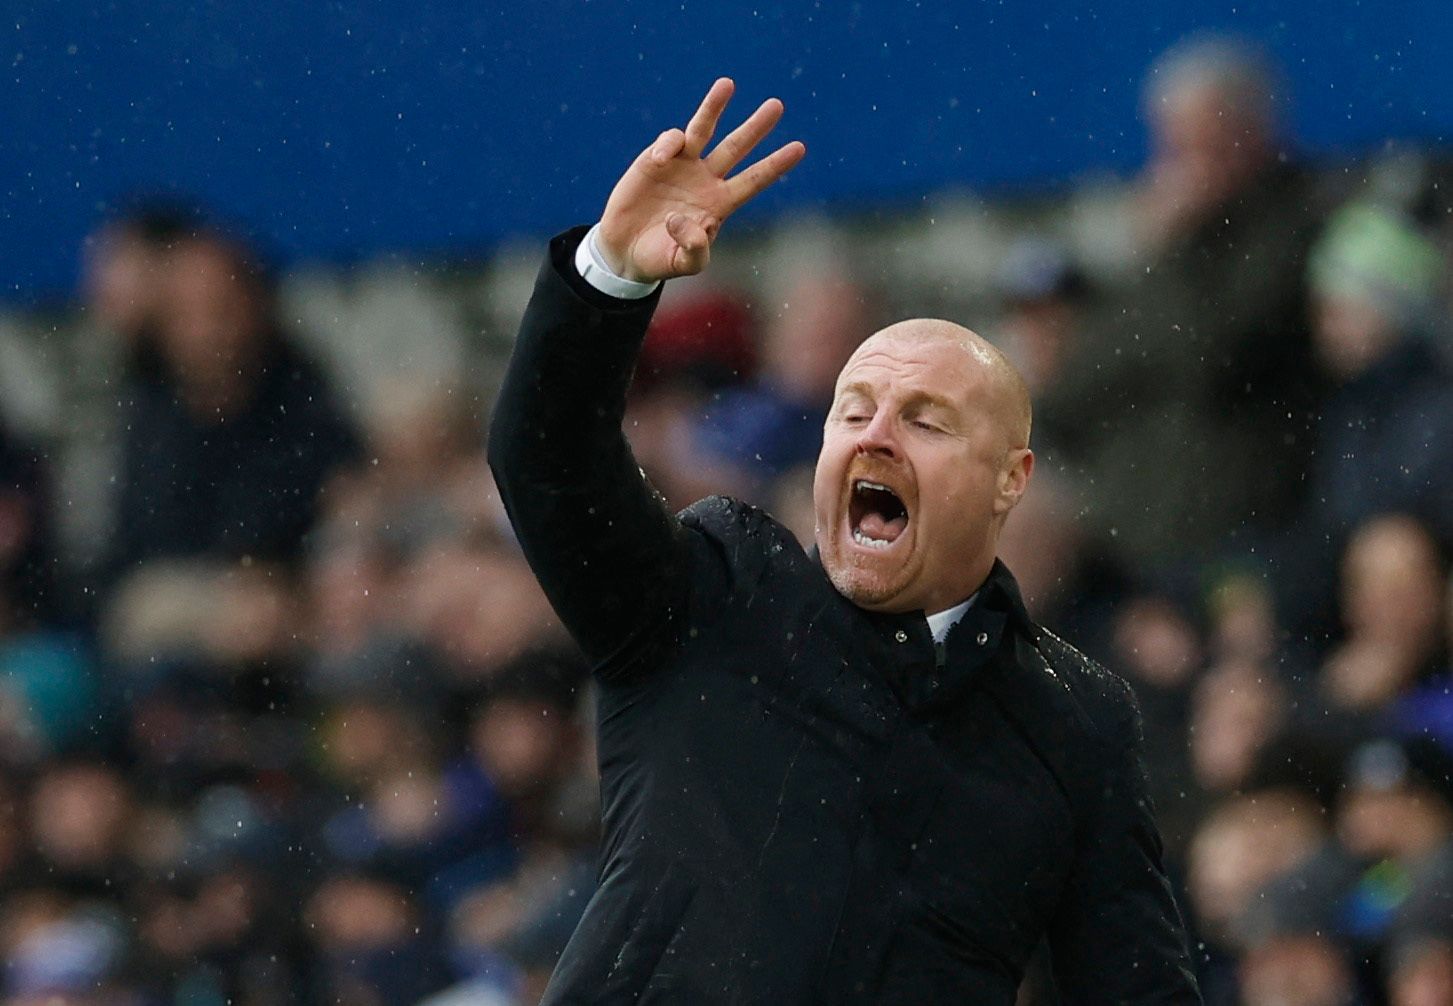 Everton manager Sean Dyche with his hand up in the air